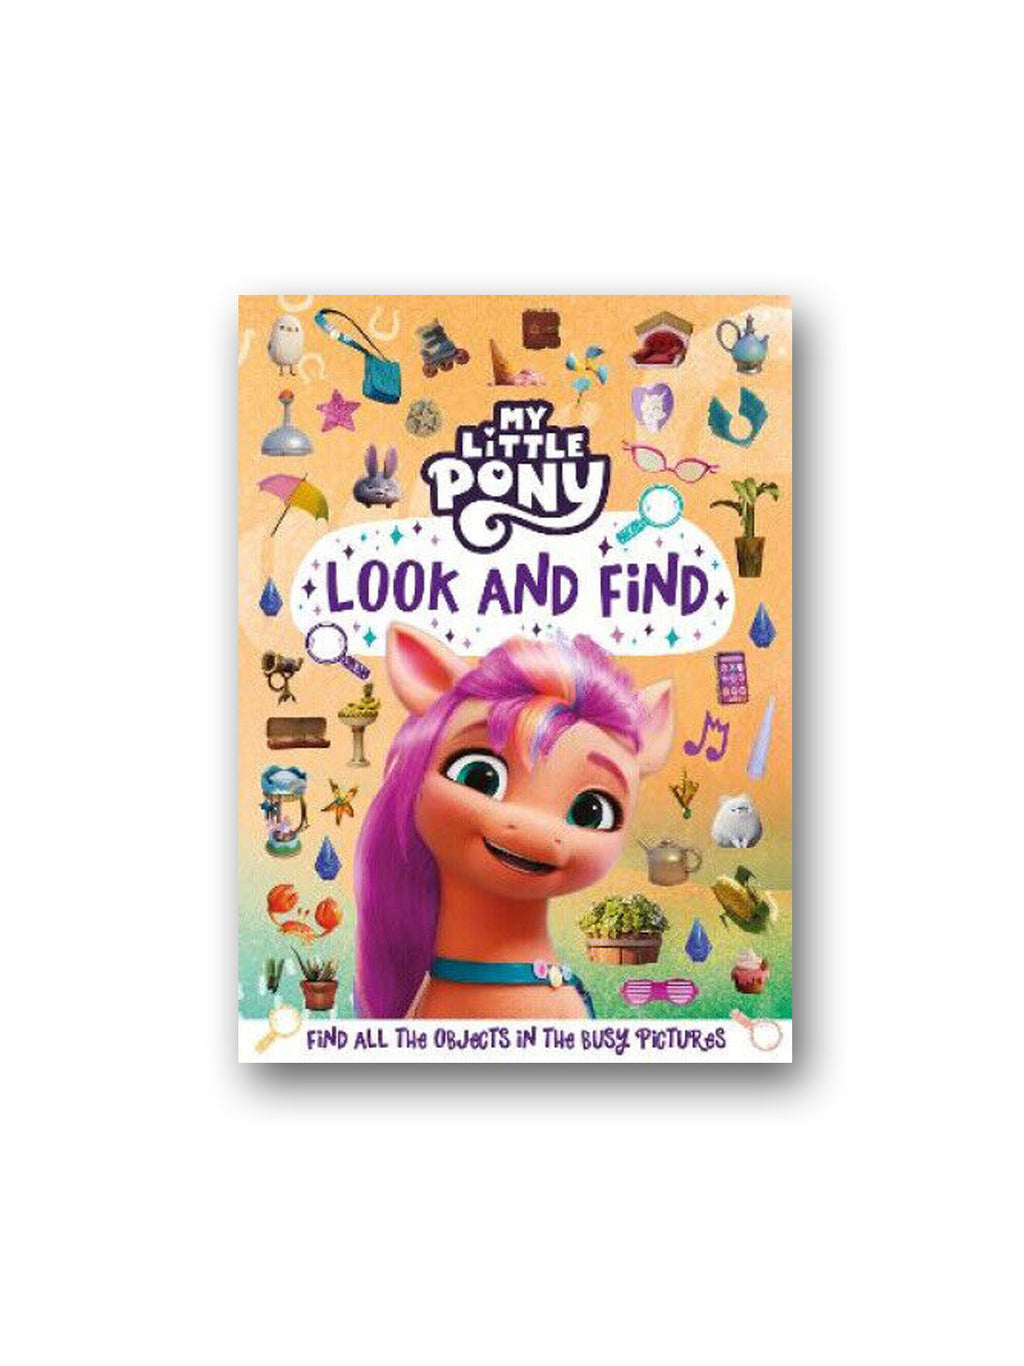 My Little Pony: Look and Find